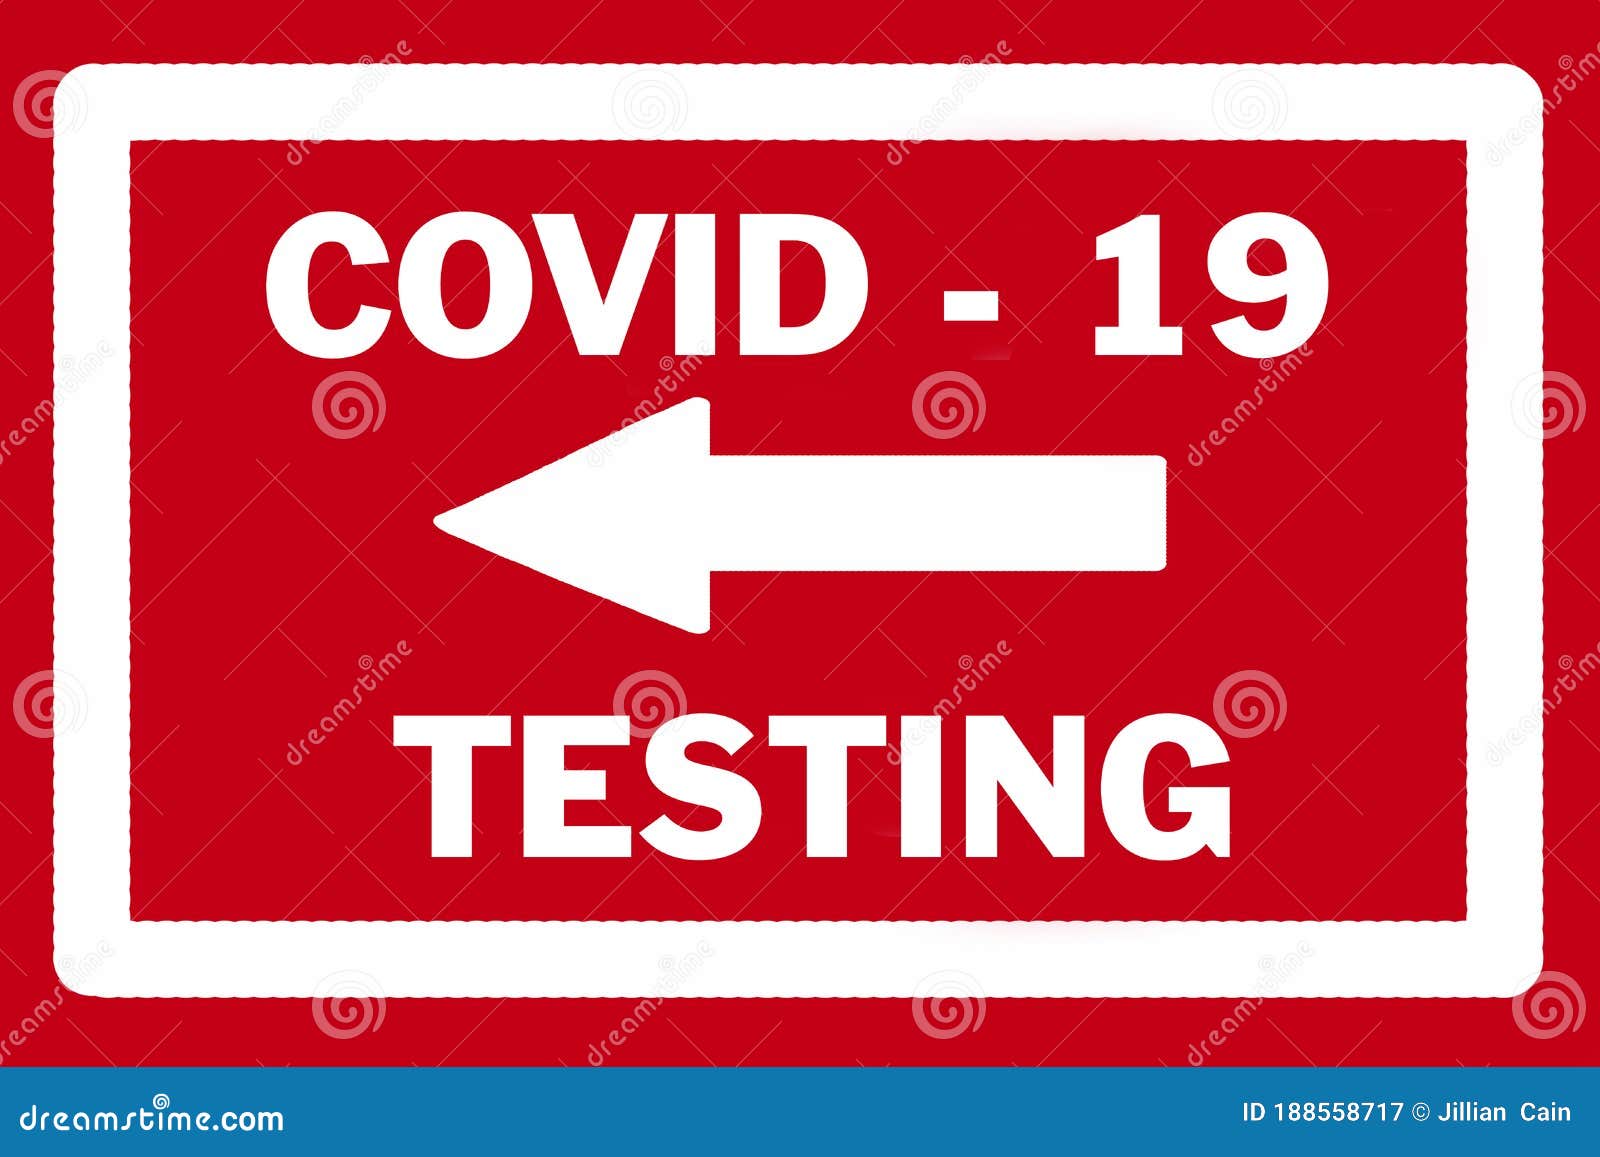 direction arrow for covid testing